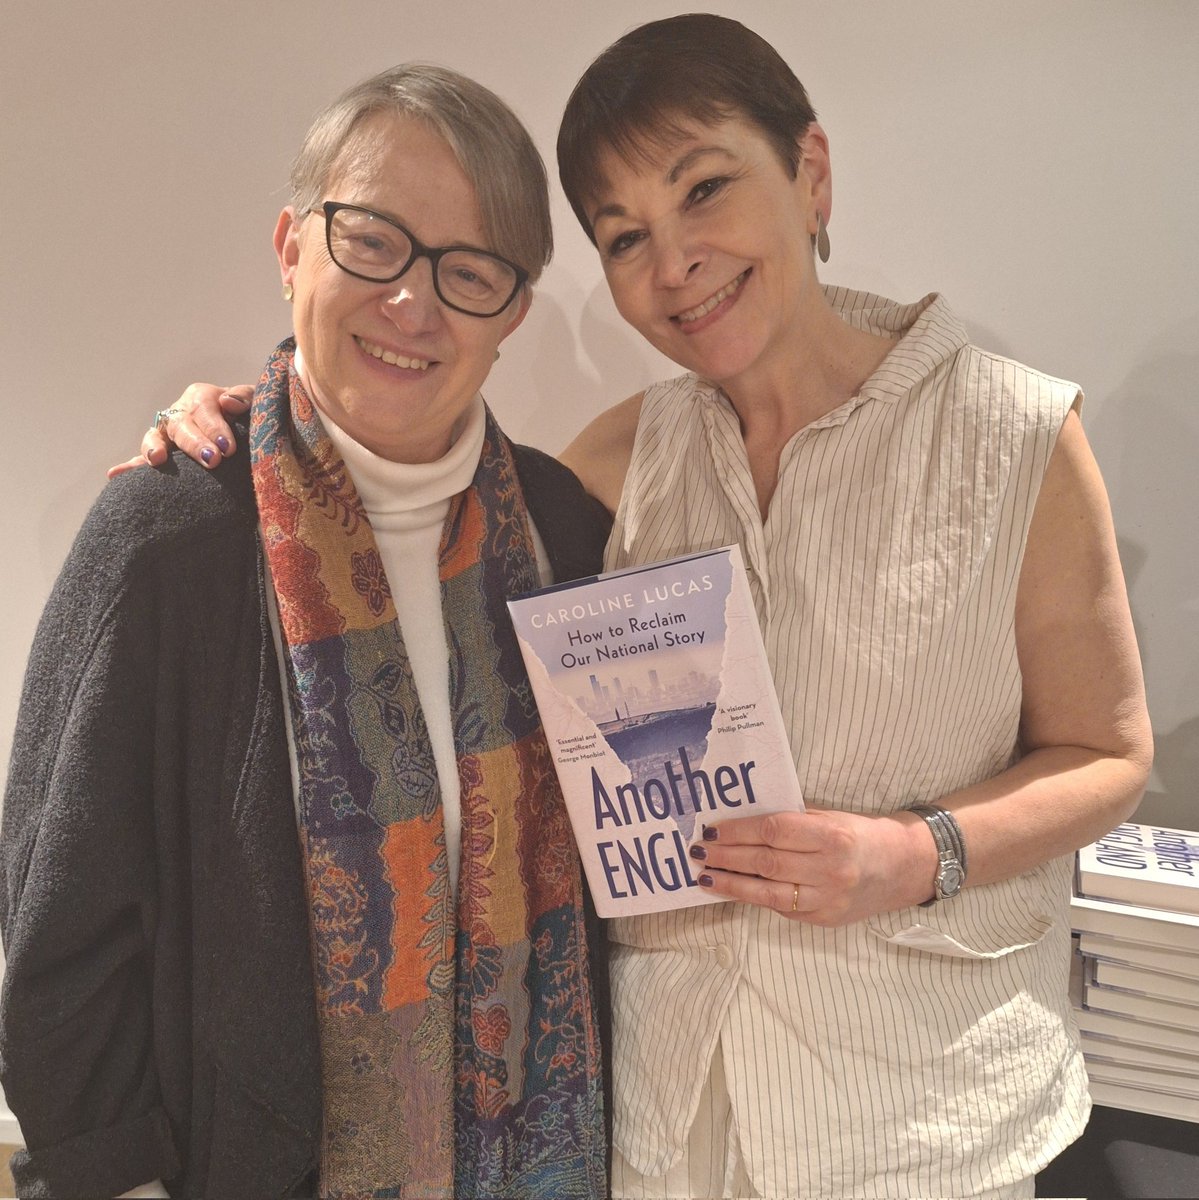 Great to be able to celebrate second @TheGreenParty book out in a month! Congratulations @CarolineLucas, highlighting a vision of #AnotherEngland